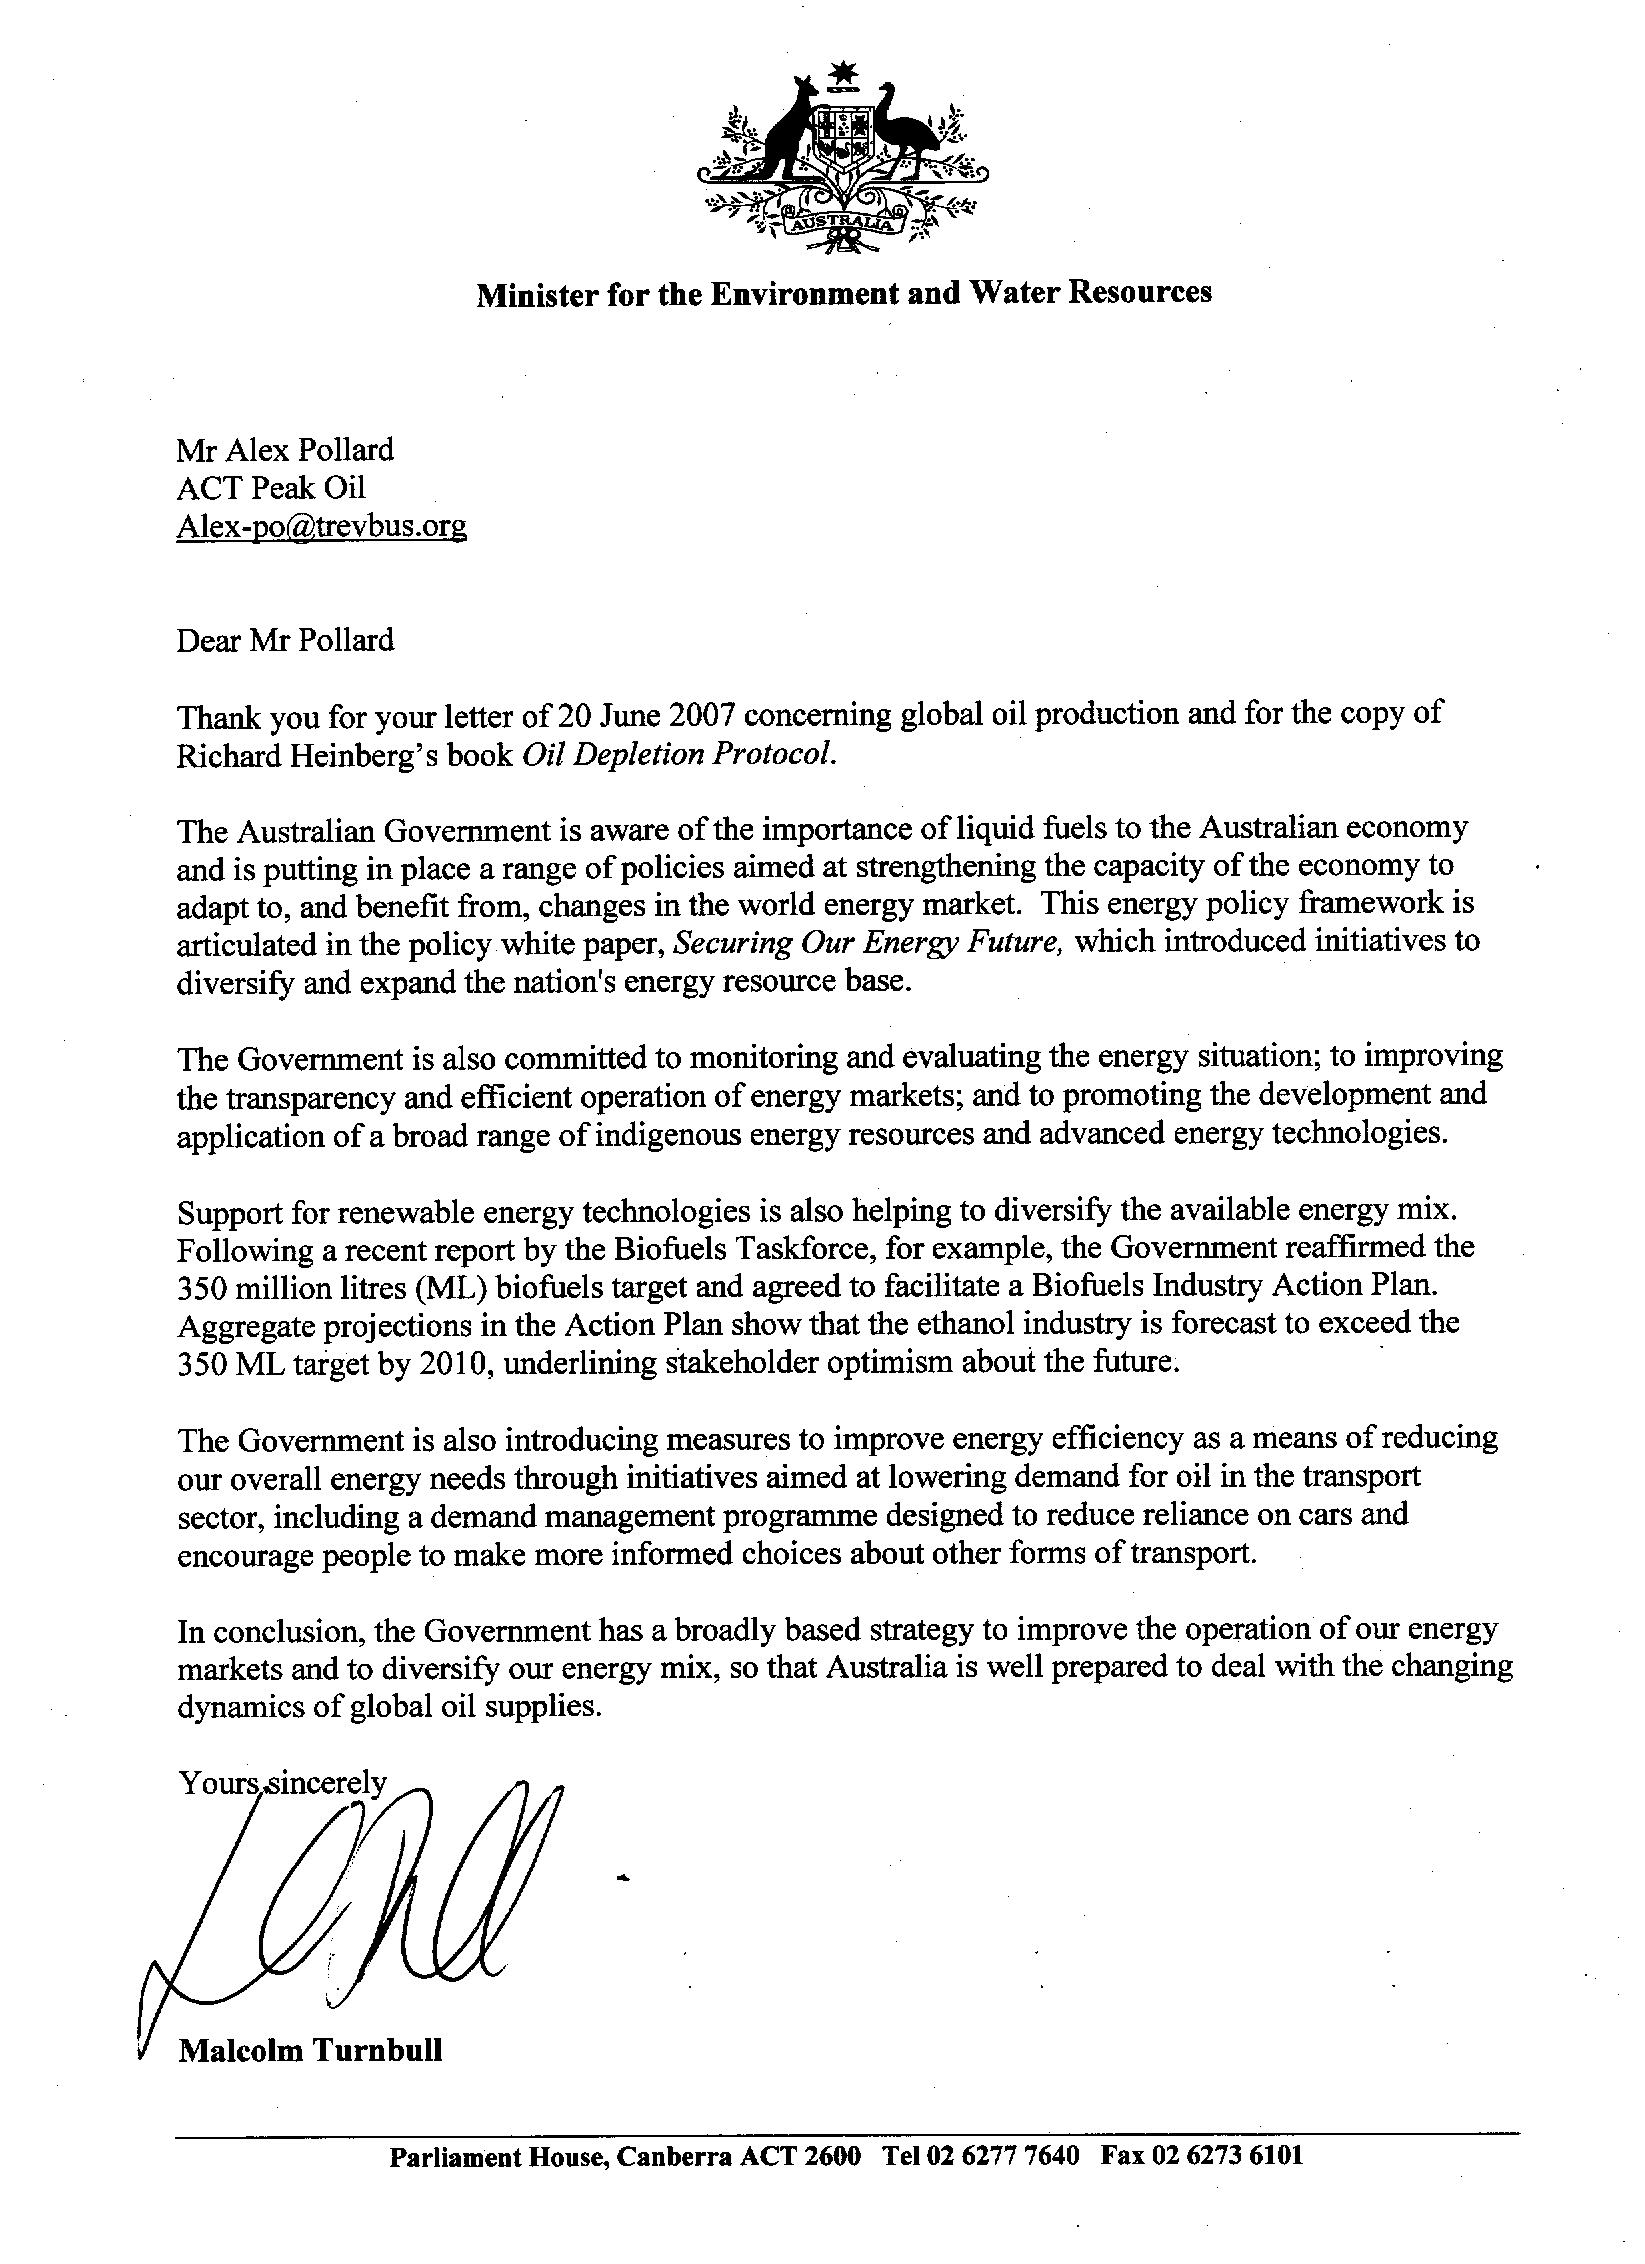 Letter from the Hon. Malcolm Turnbull